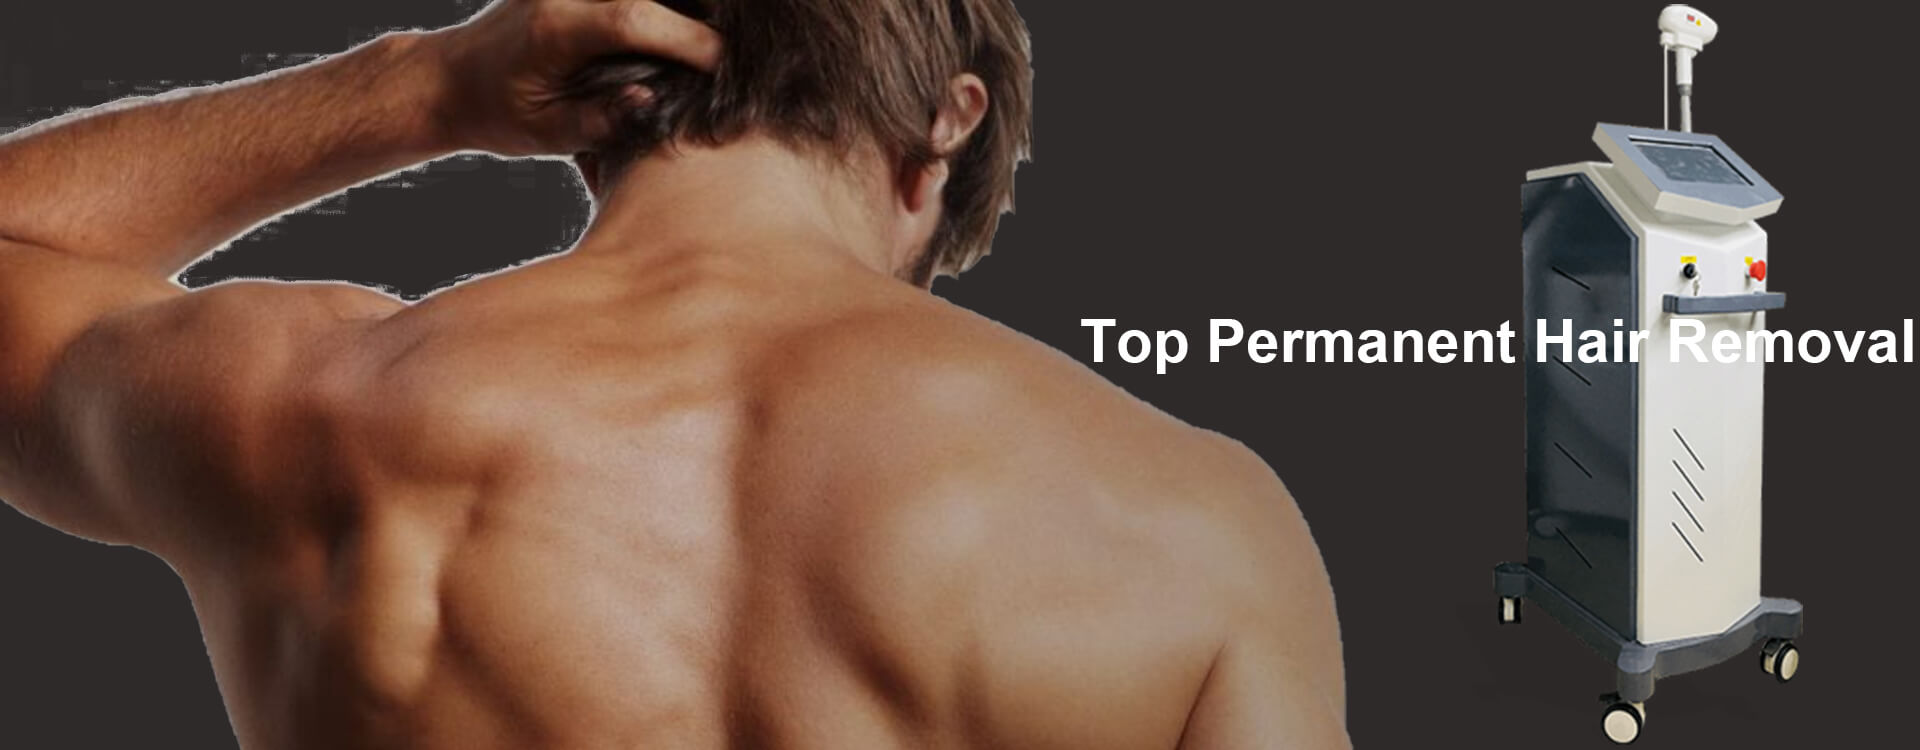 Top Permanent Hair Removal